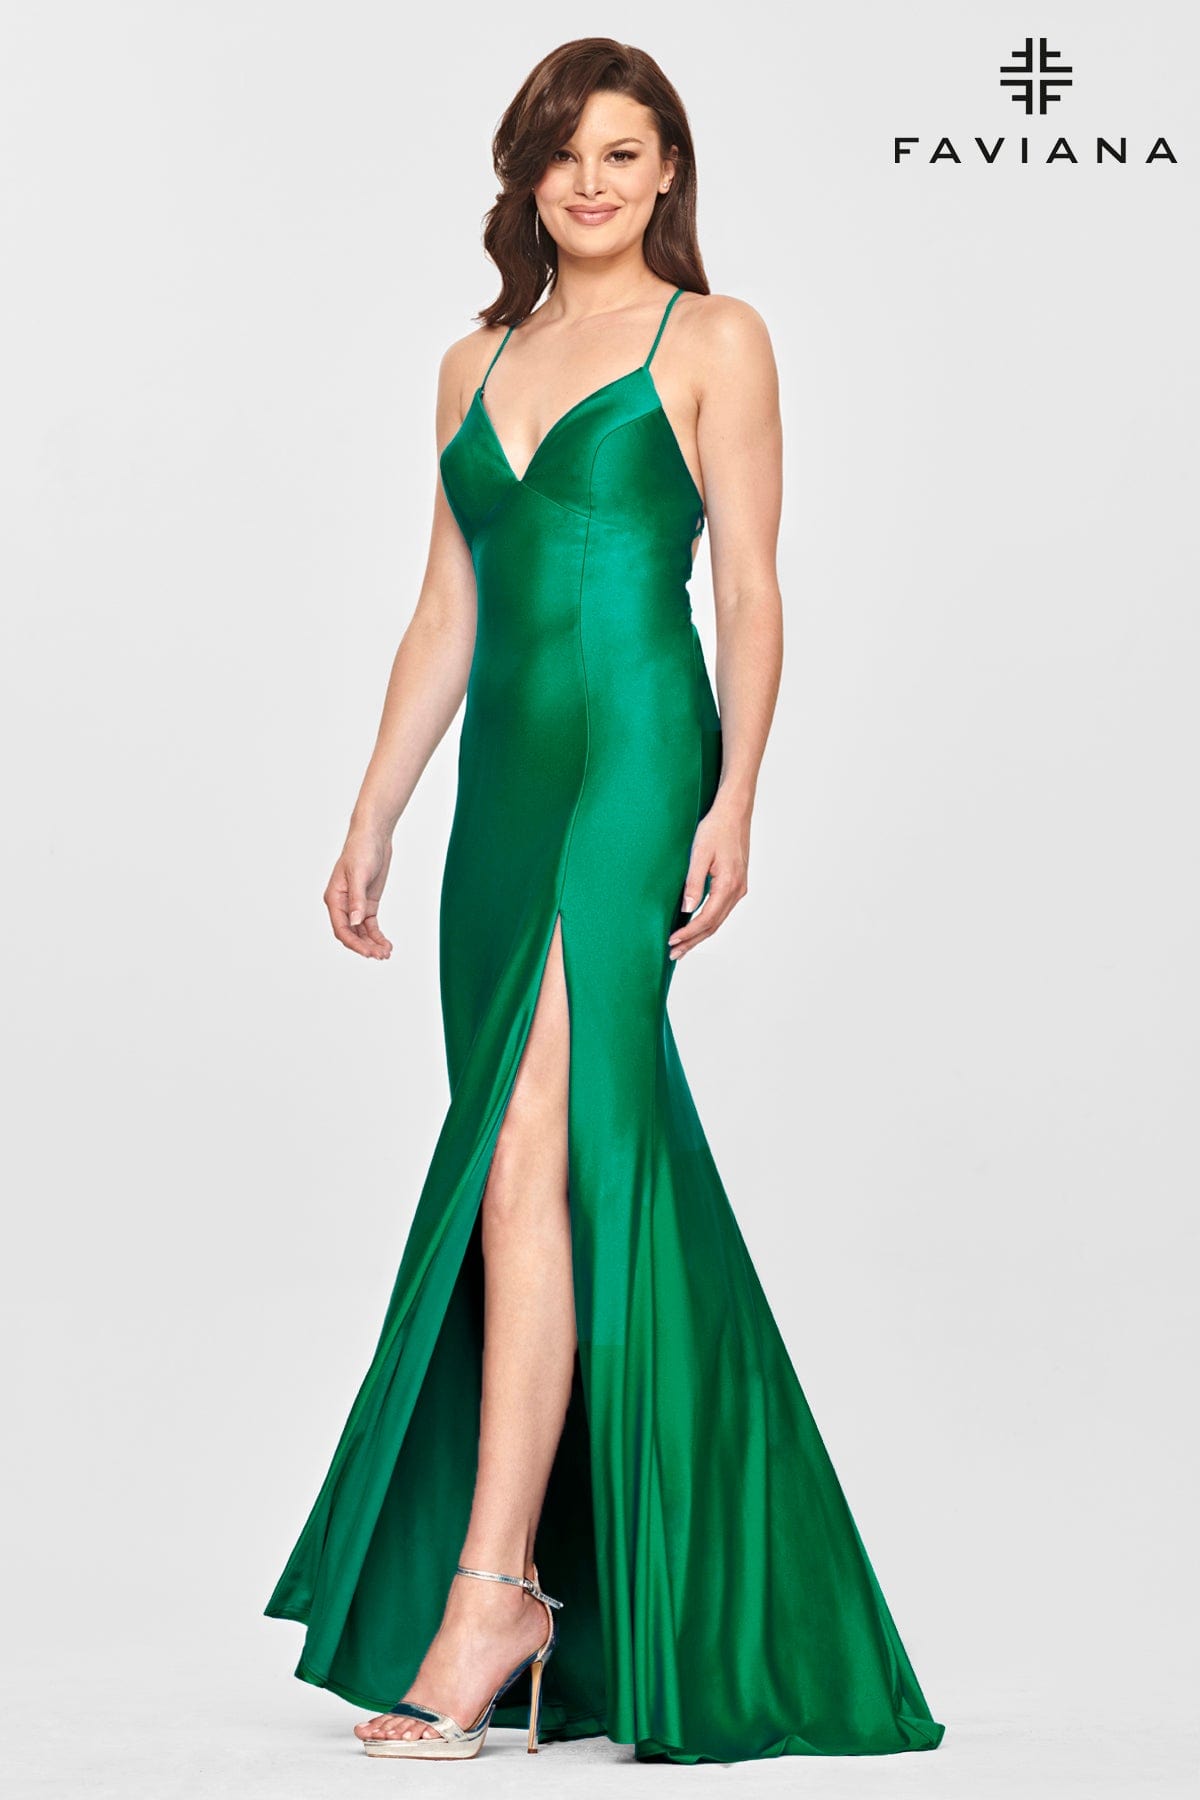 V Neckline Prom Dress With Stretch Fabric And Corset Back